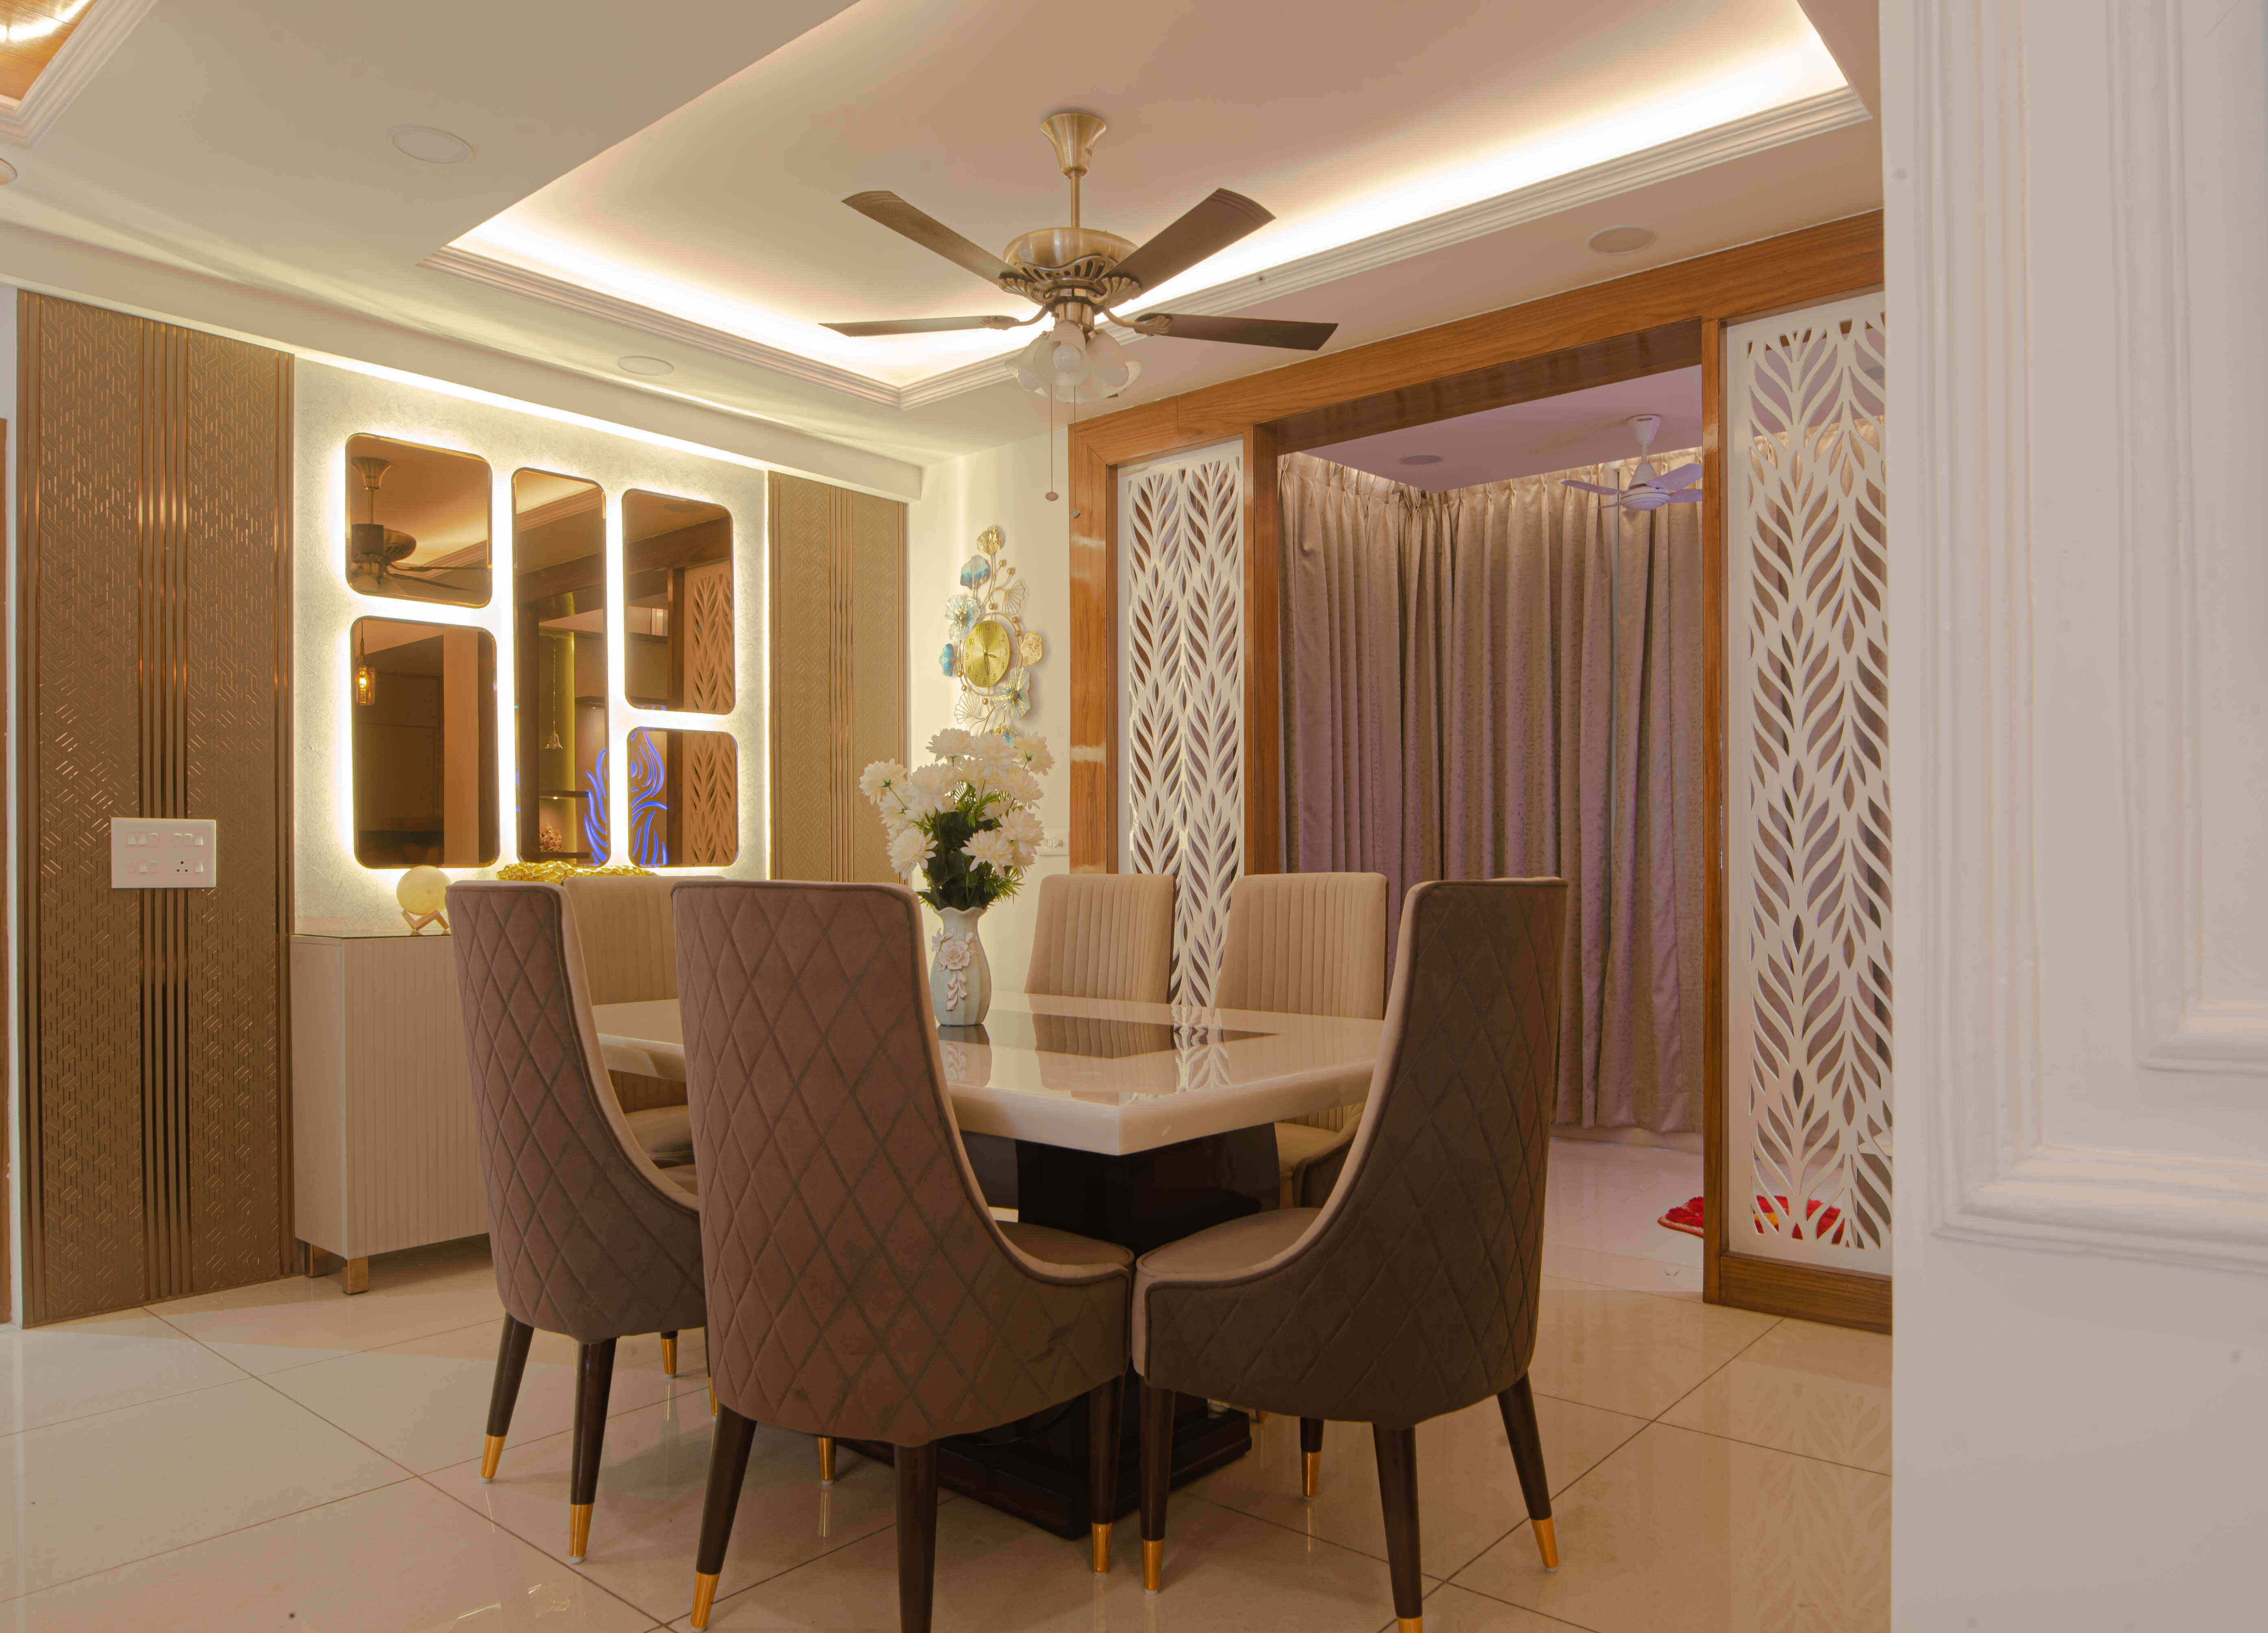 Contemporary Dining Room Design With Chandelier